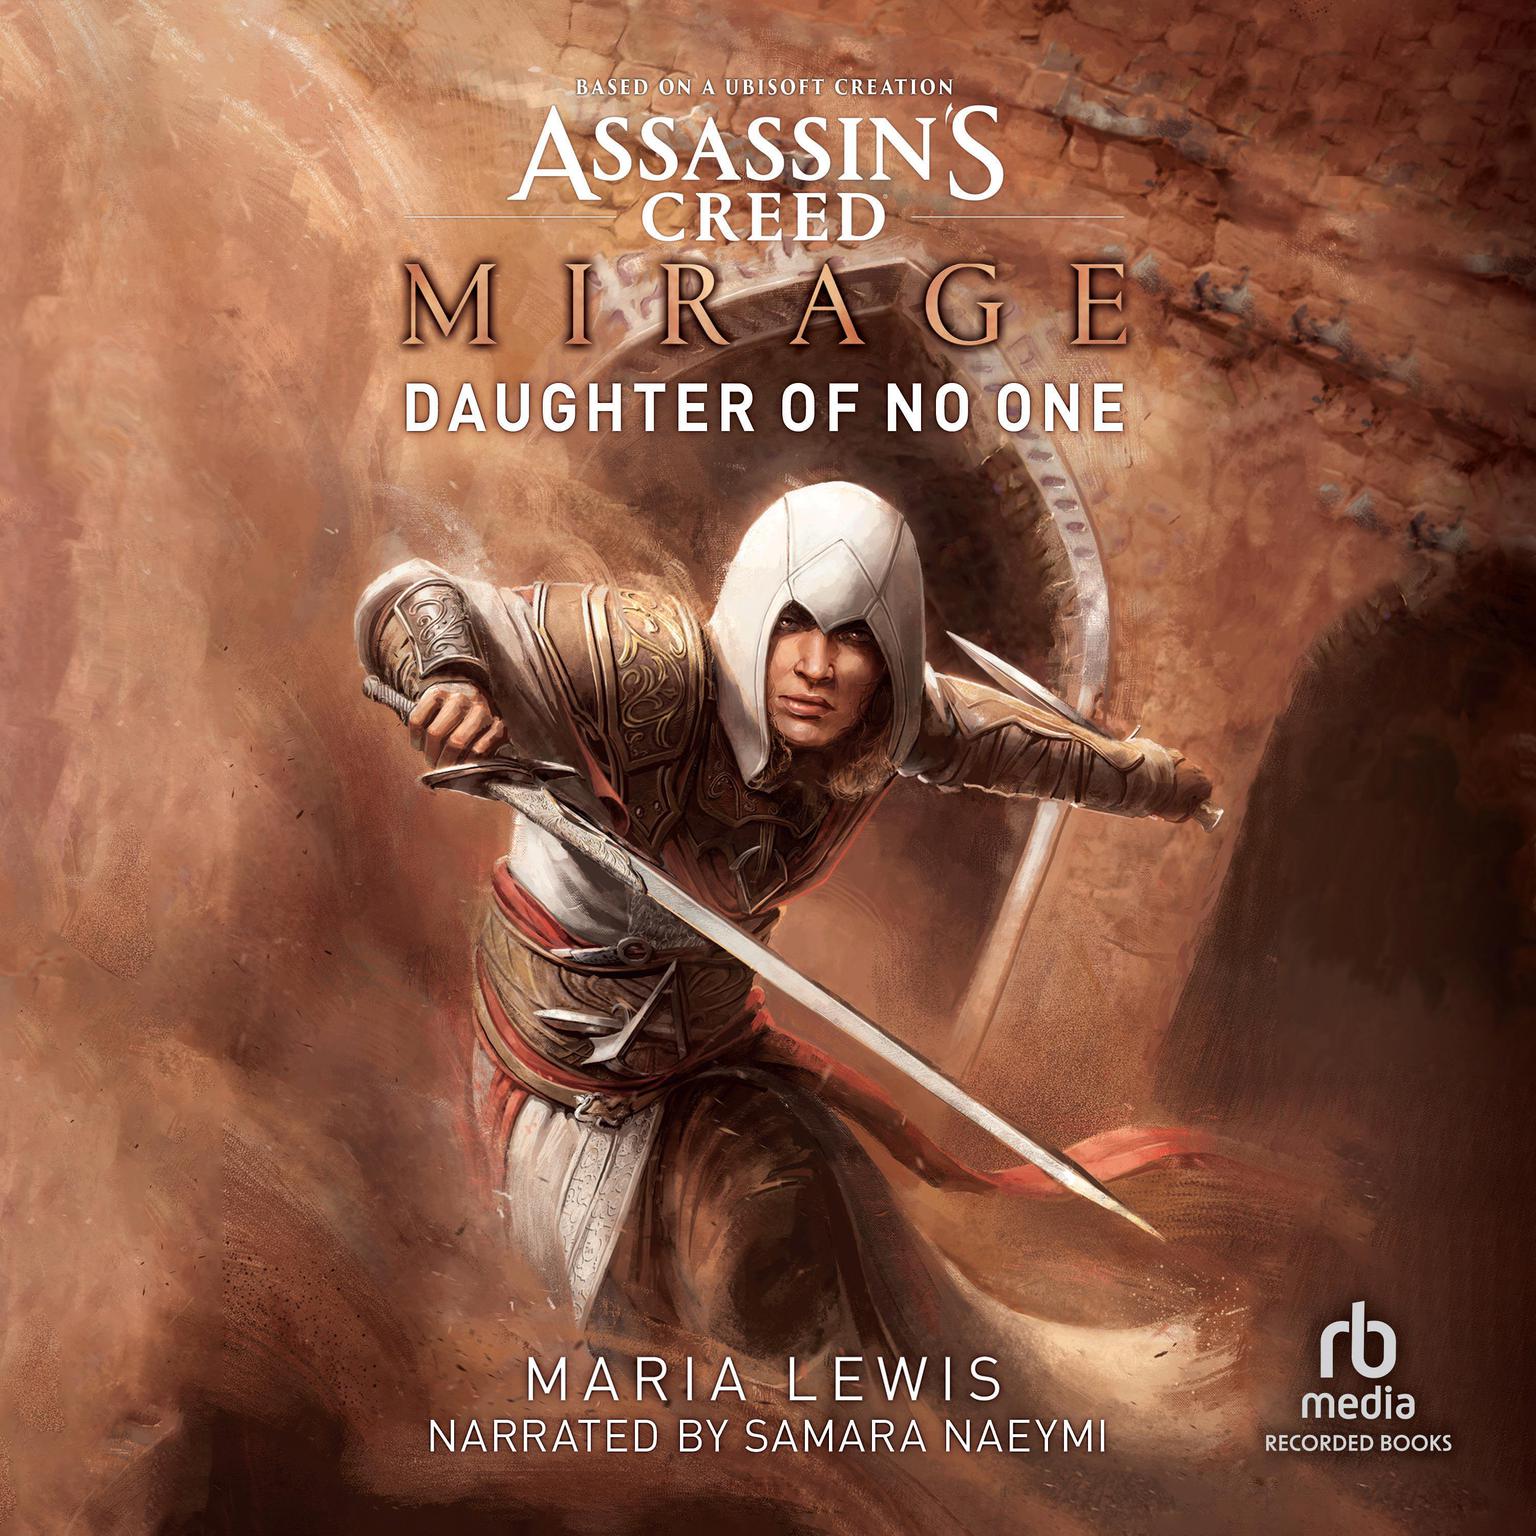 Assassins Creed: Mirage: Daughter of No One Audiobook, by Maria Lewis